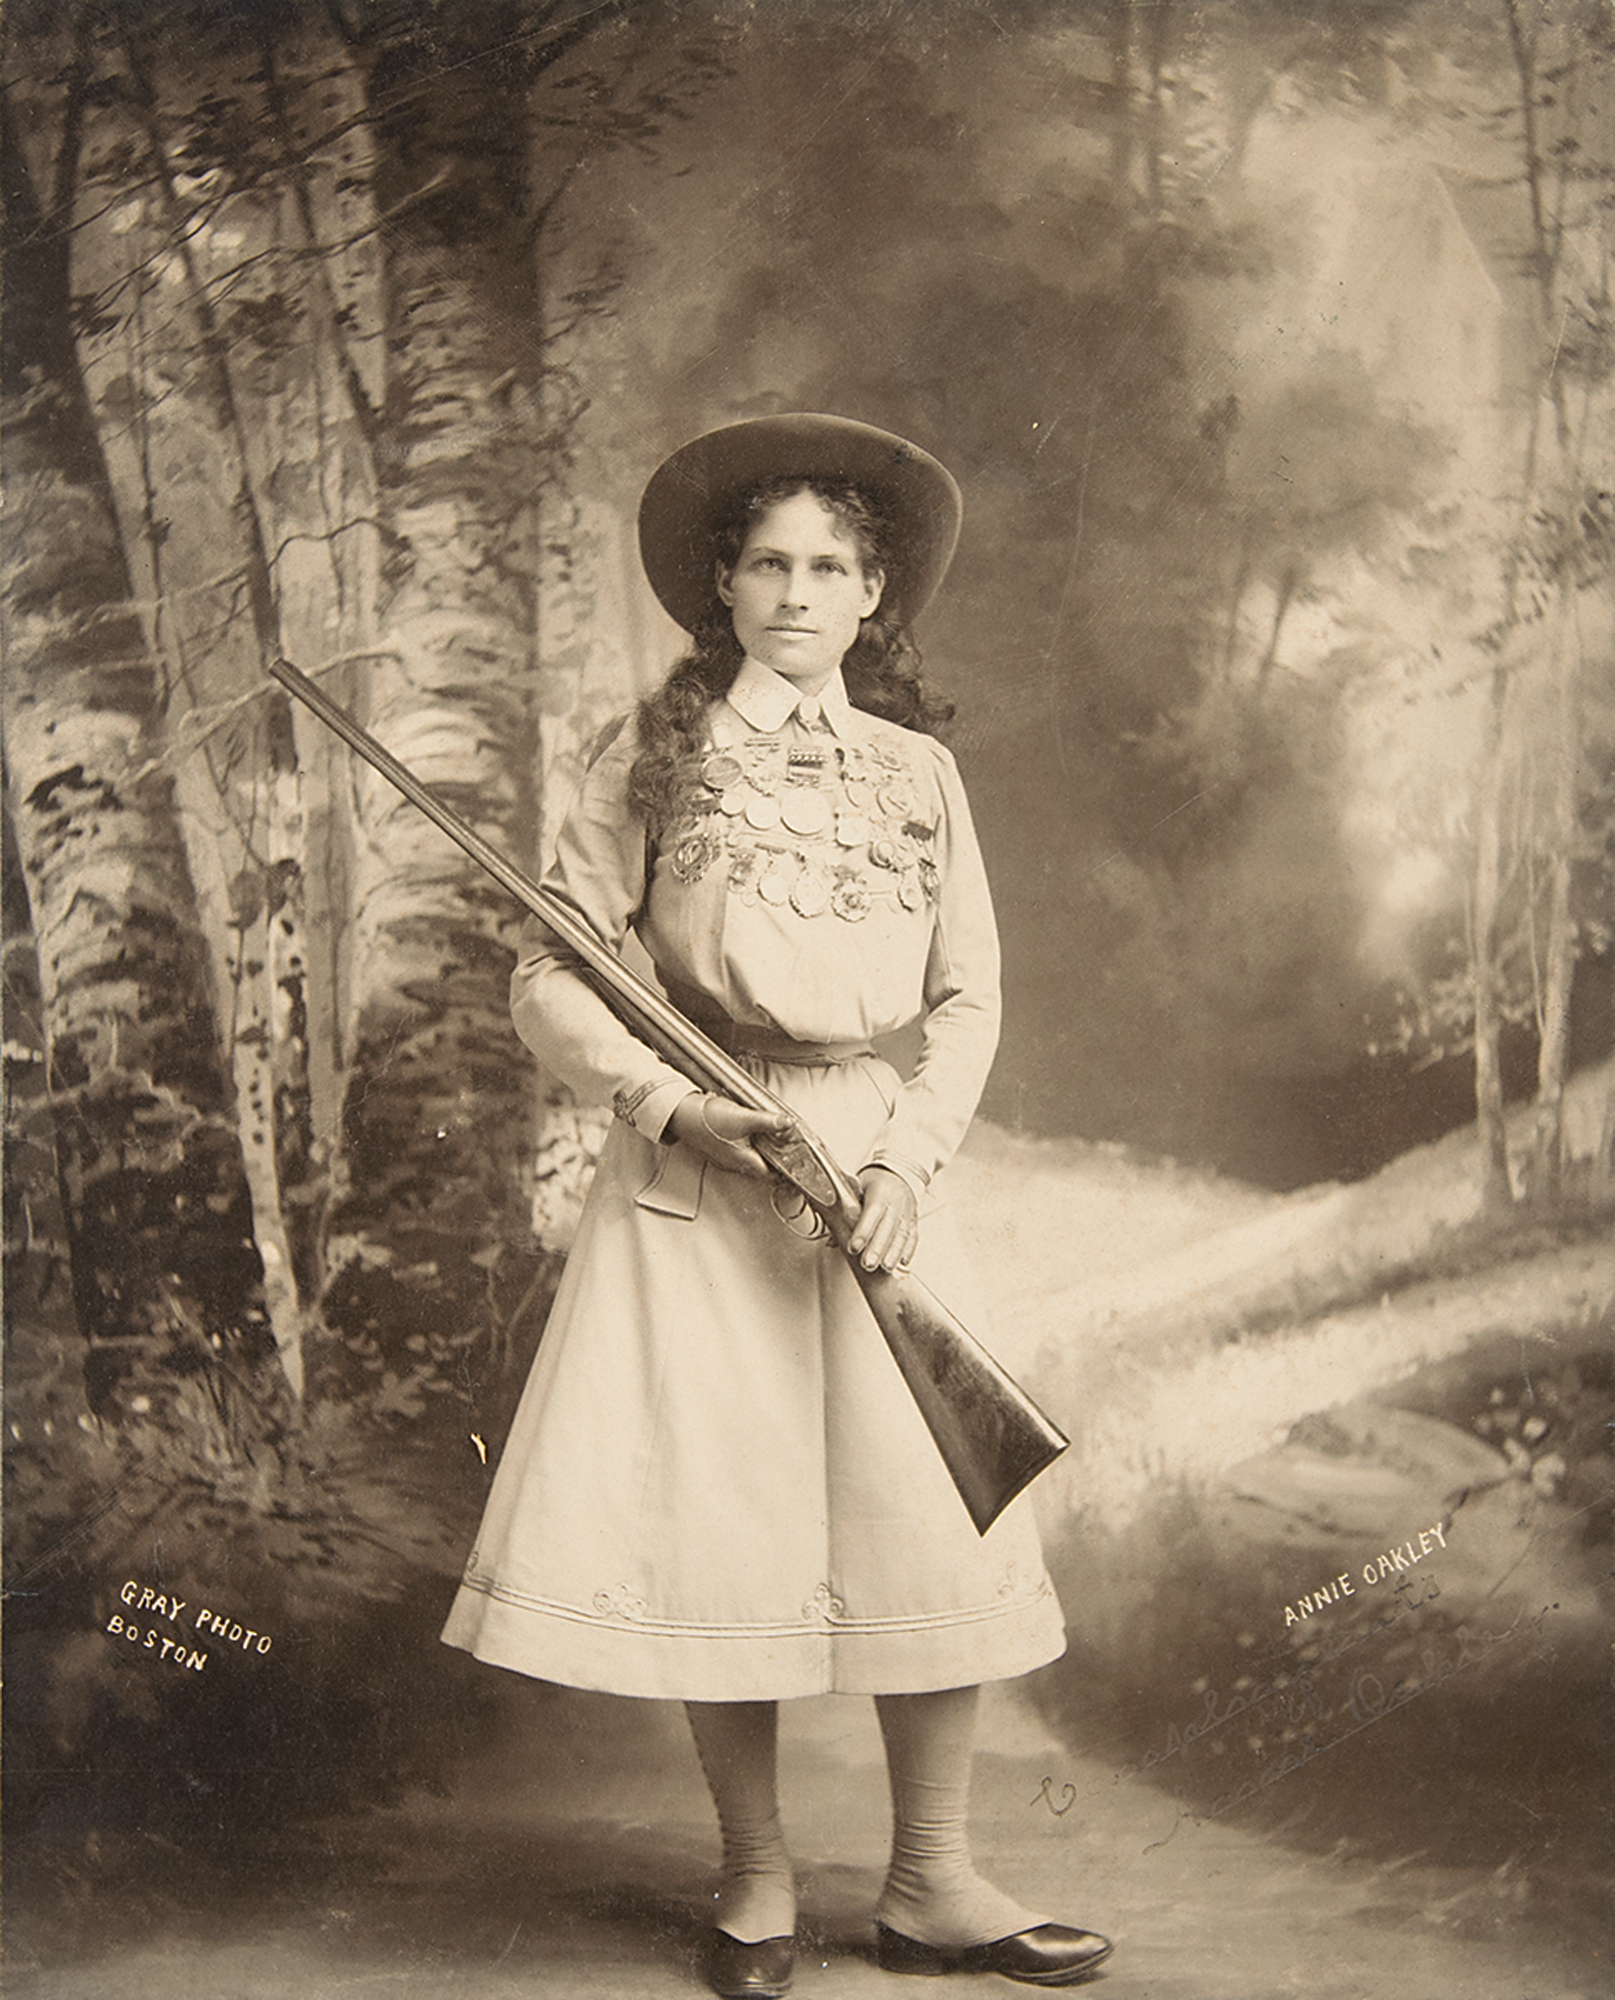 Annie Oakley Signed Photograph | Sold for $5,000 | RR Auction